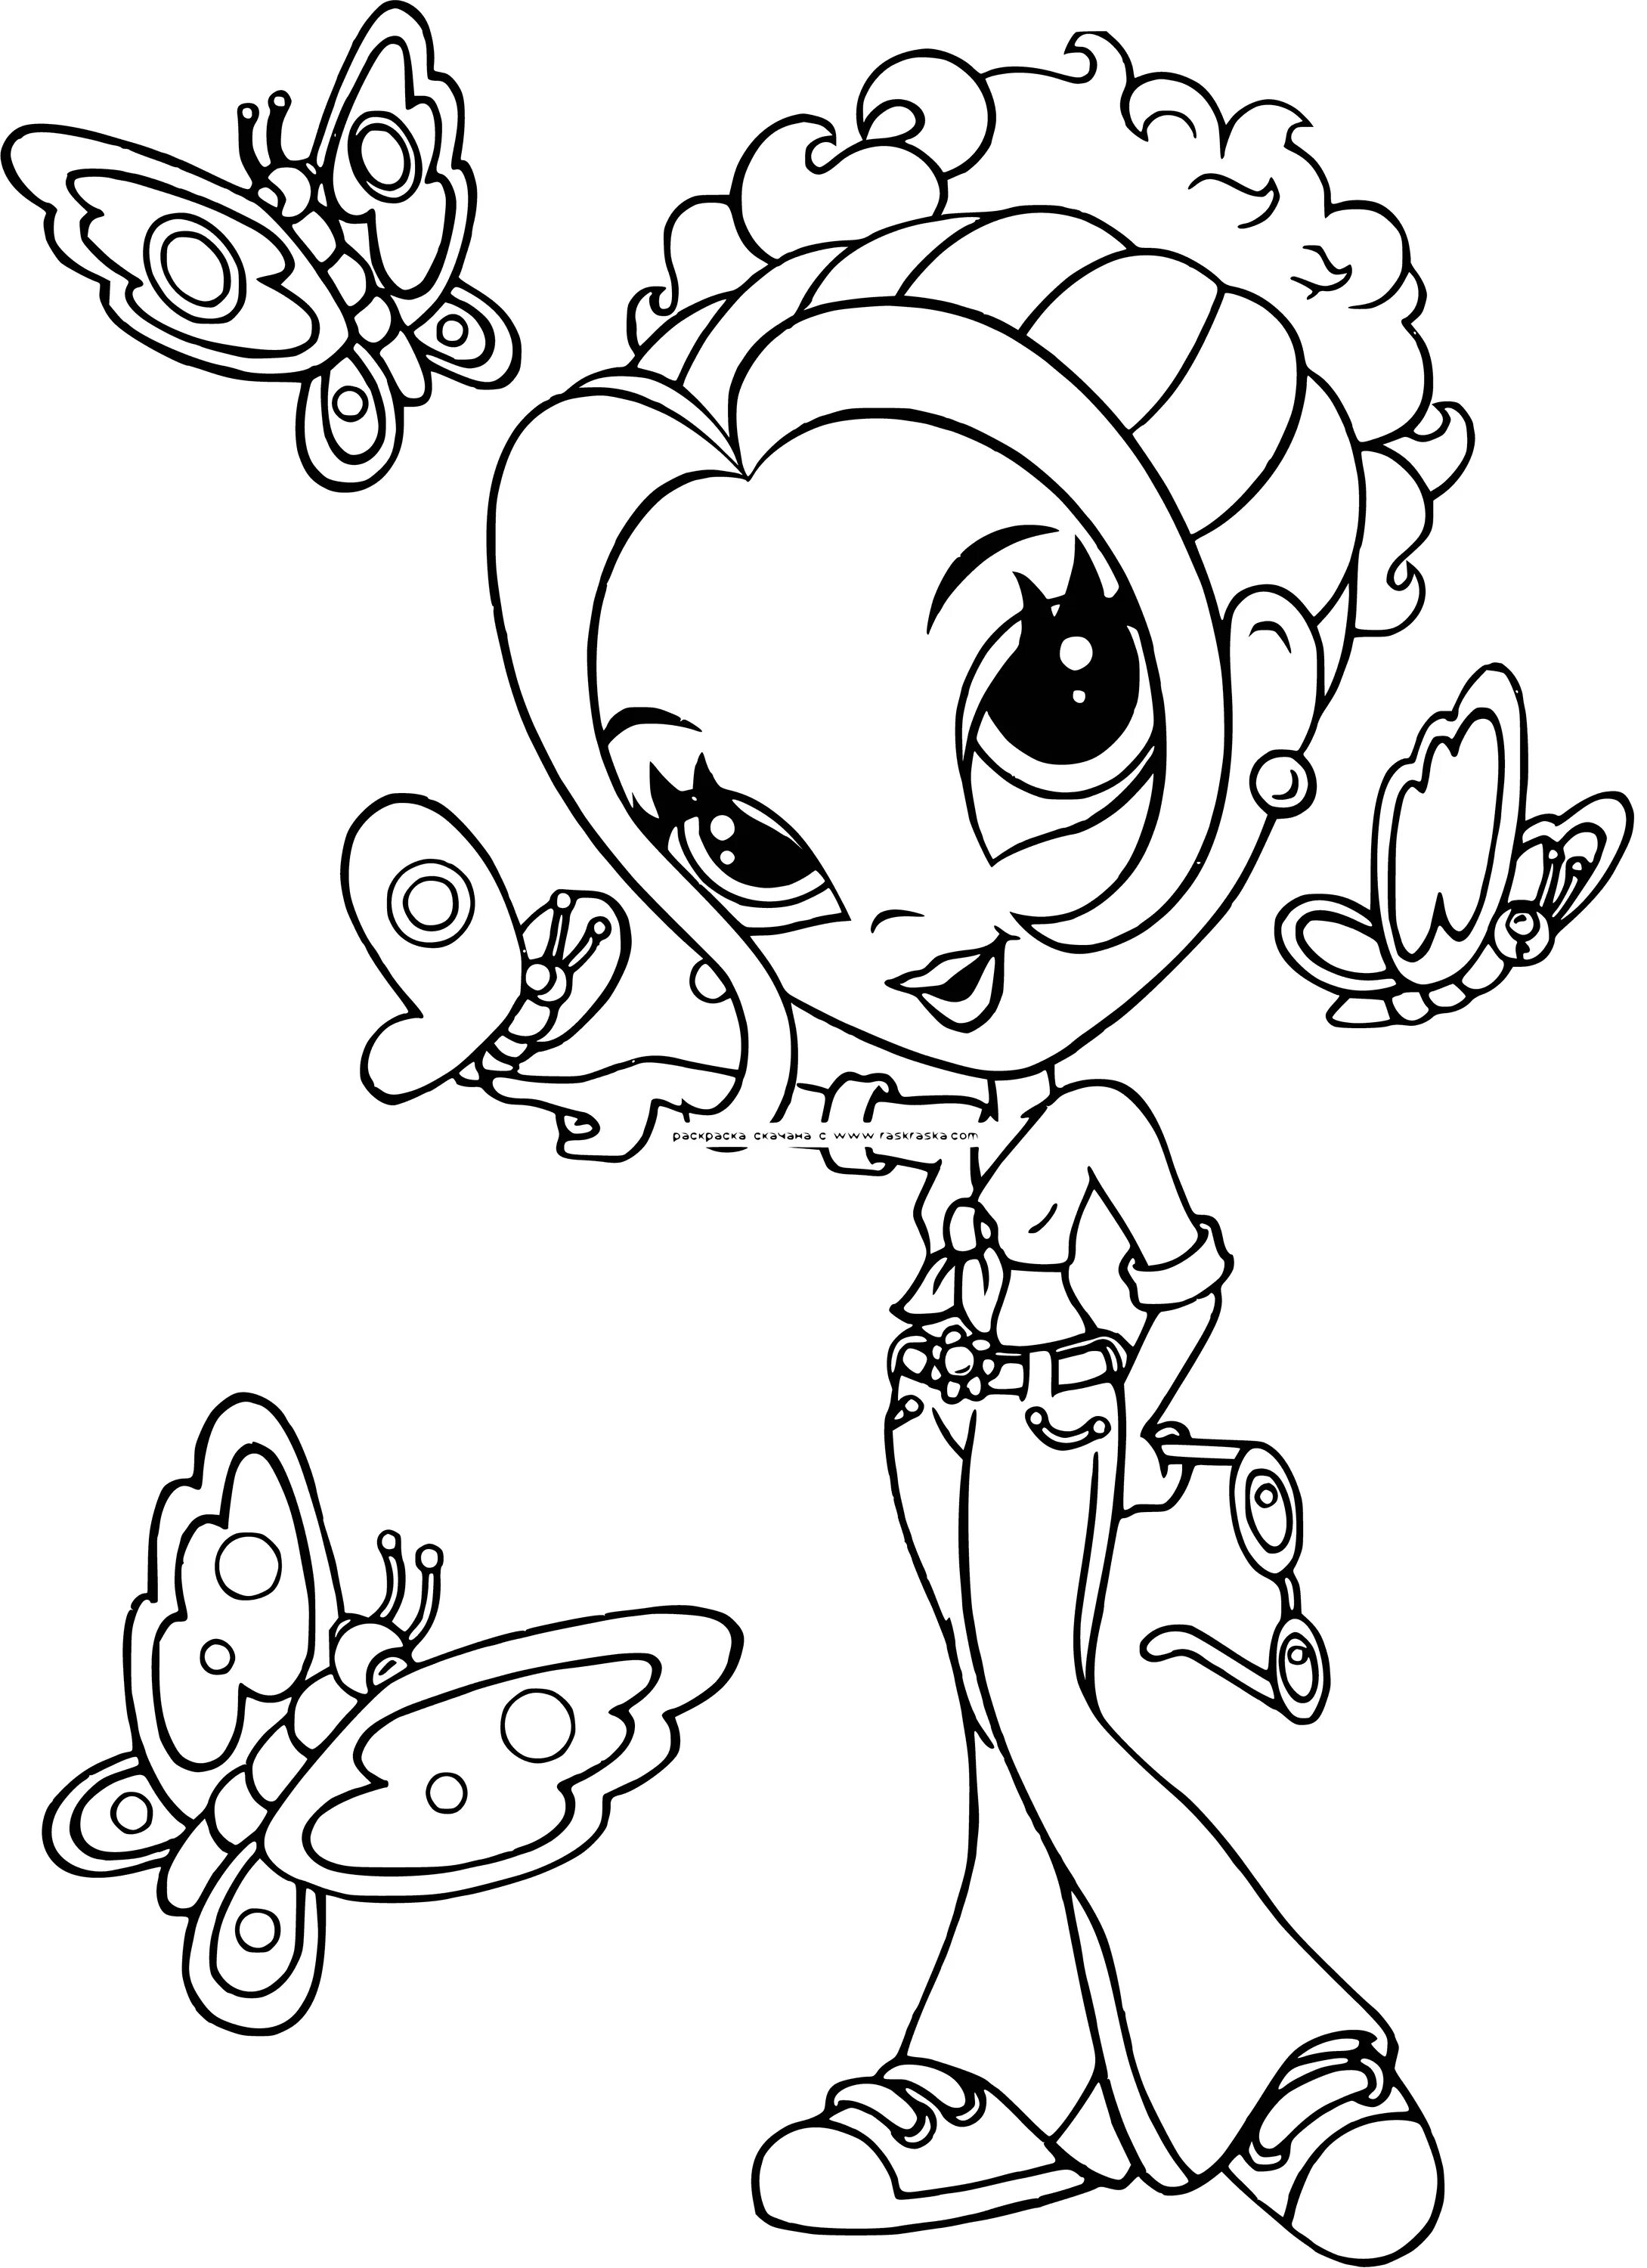 Coloring-illusions coloring page книжка-раскраска